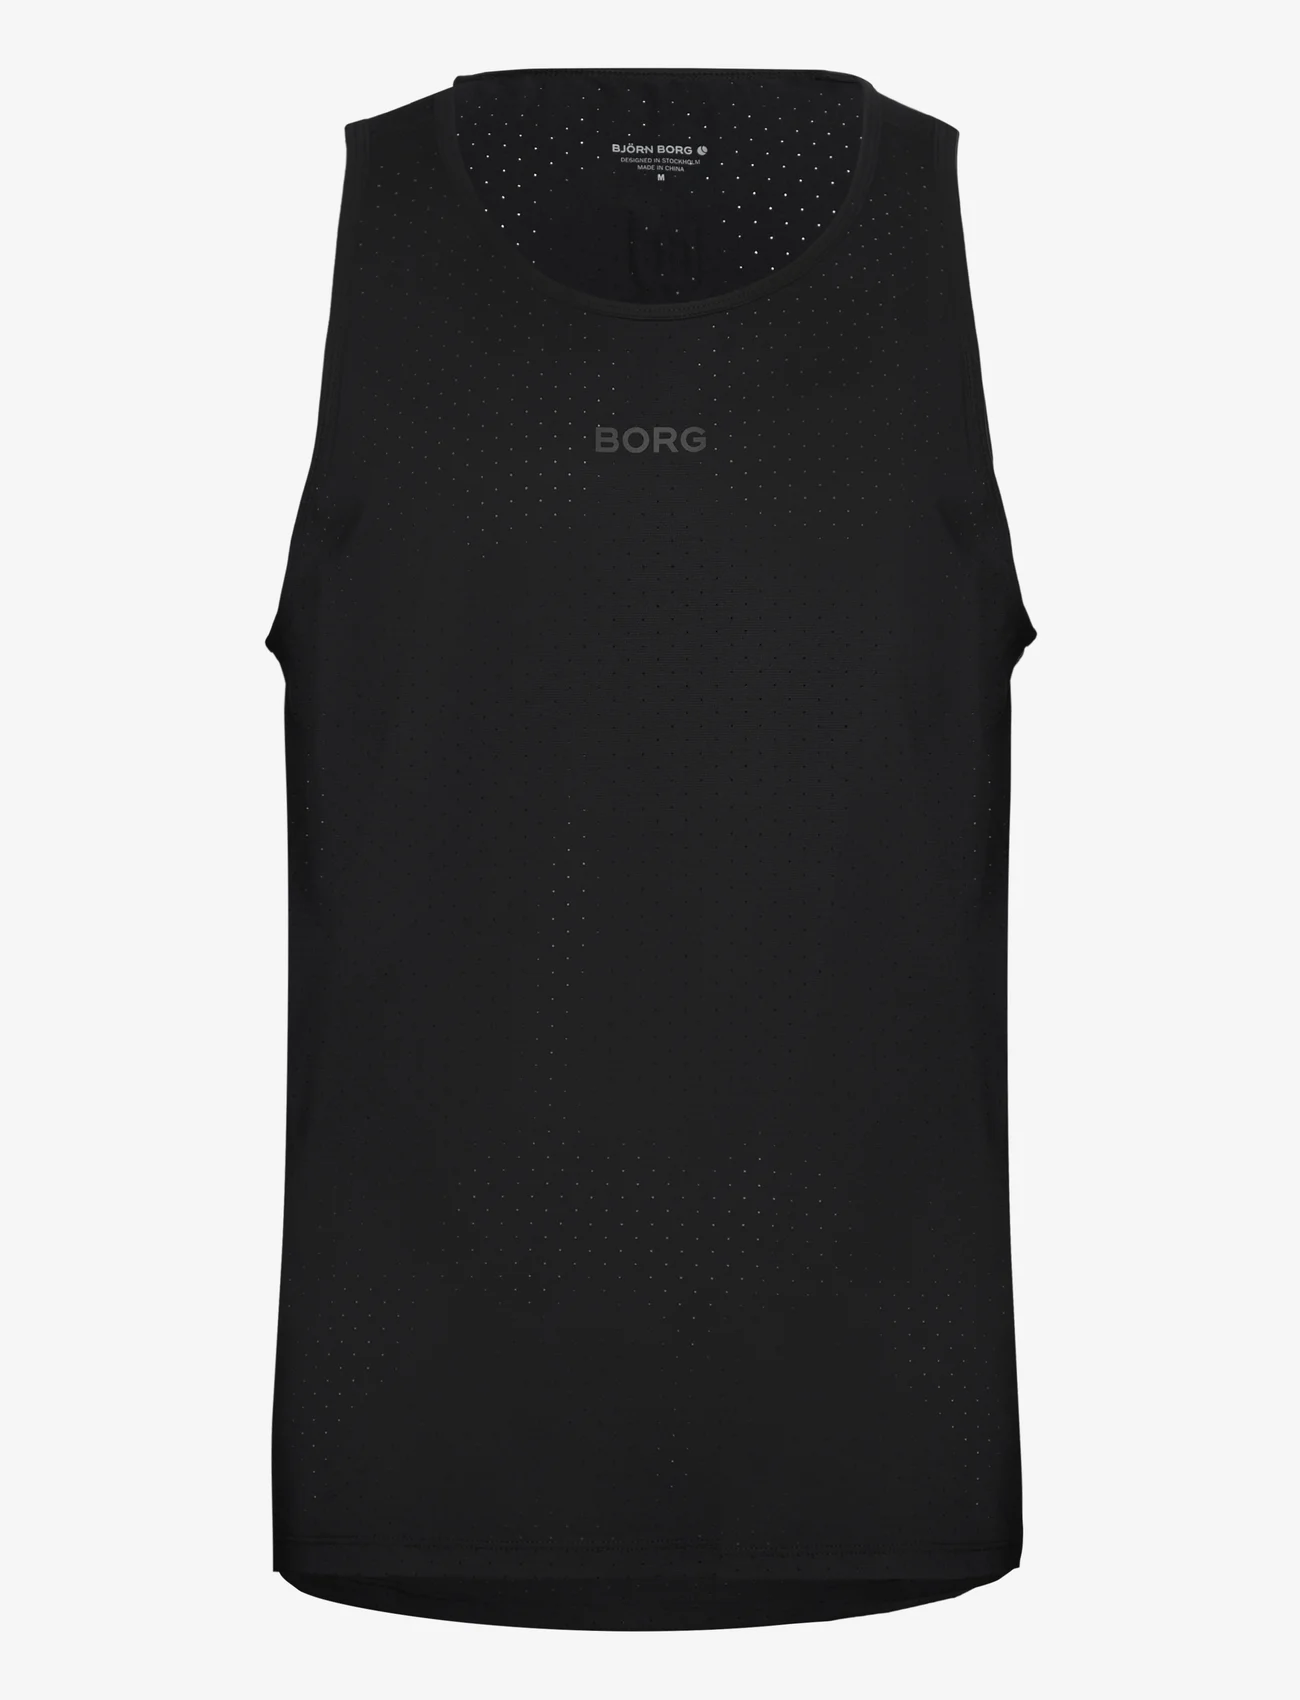 Björn Borg - BORG RUNNING PERFORATED TANK - lowest prices - black beauty - 0